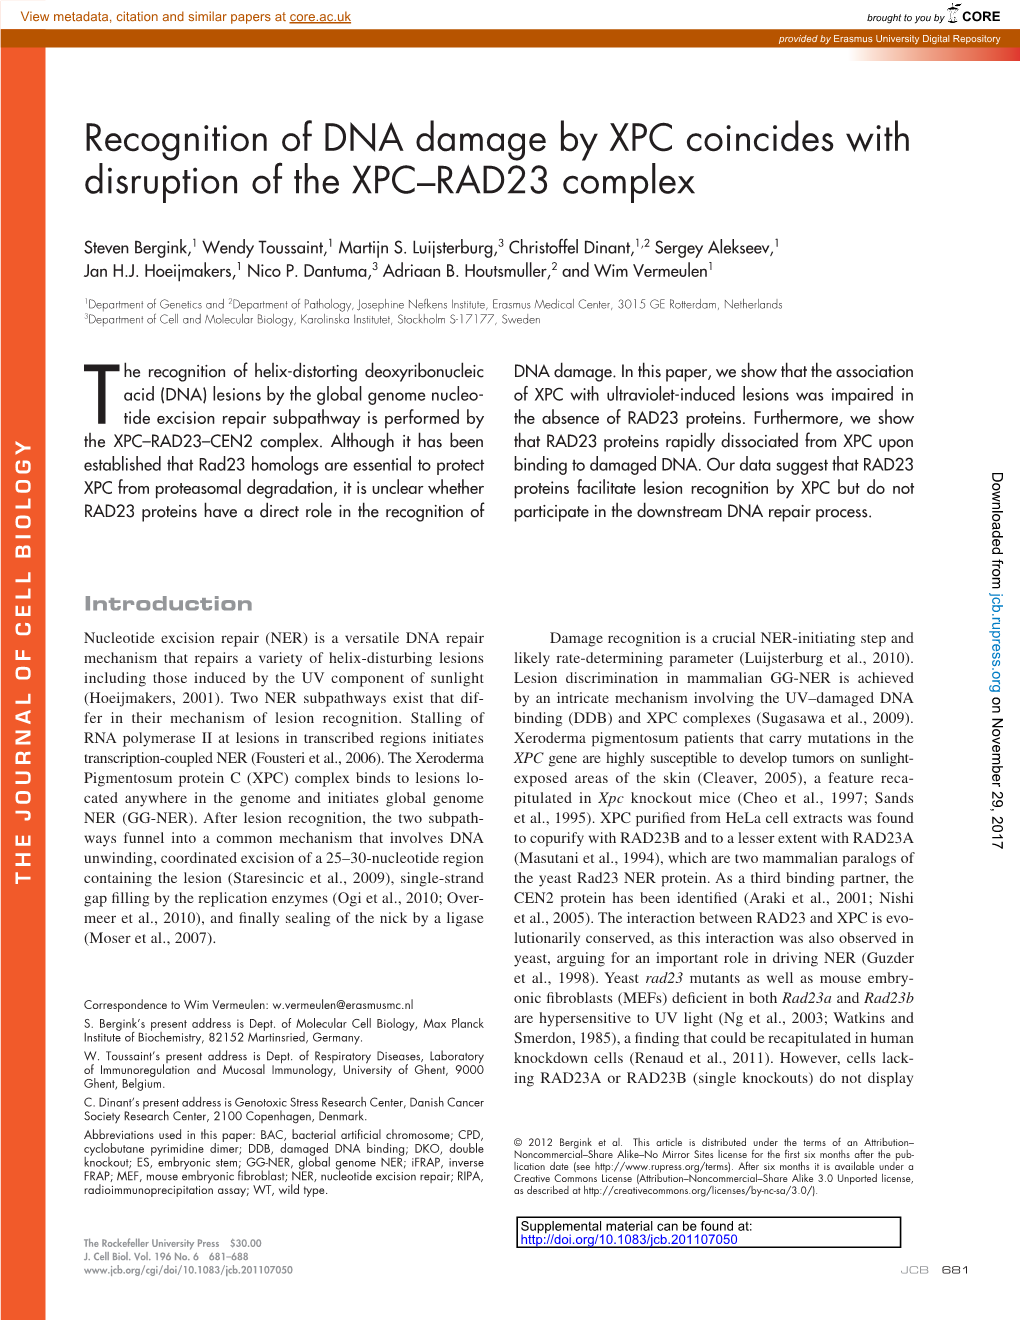 Recognition of DNA Damage by XPC Coincides with Disruption of the XPC–RAD23 Complex